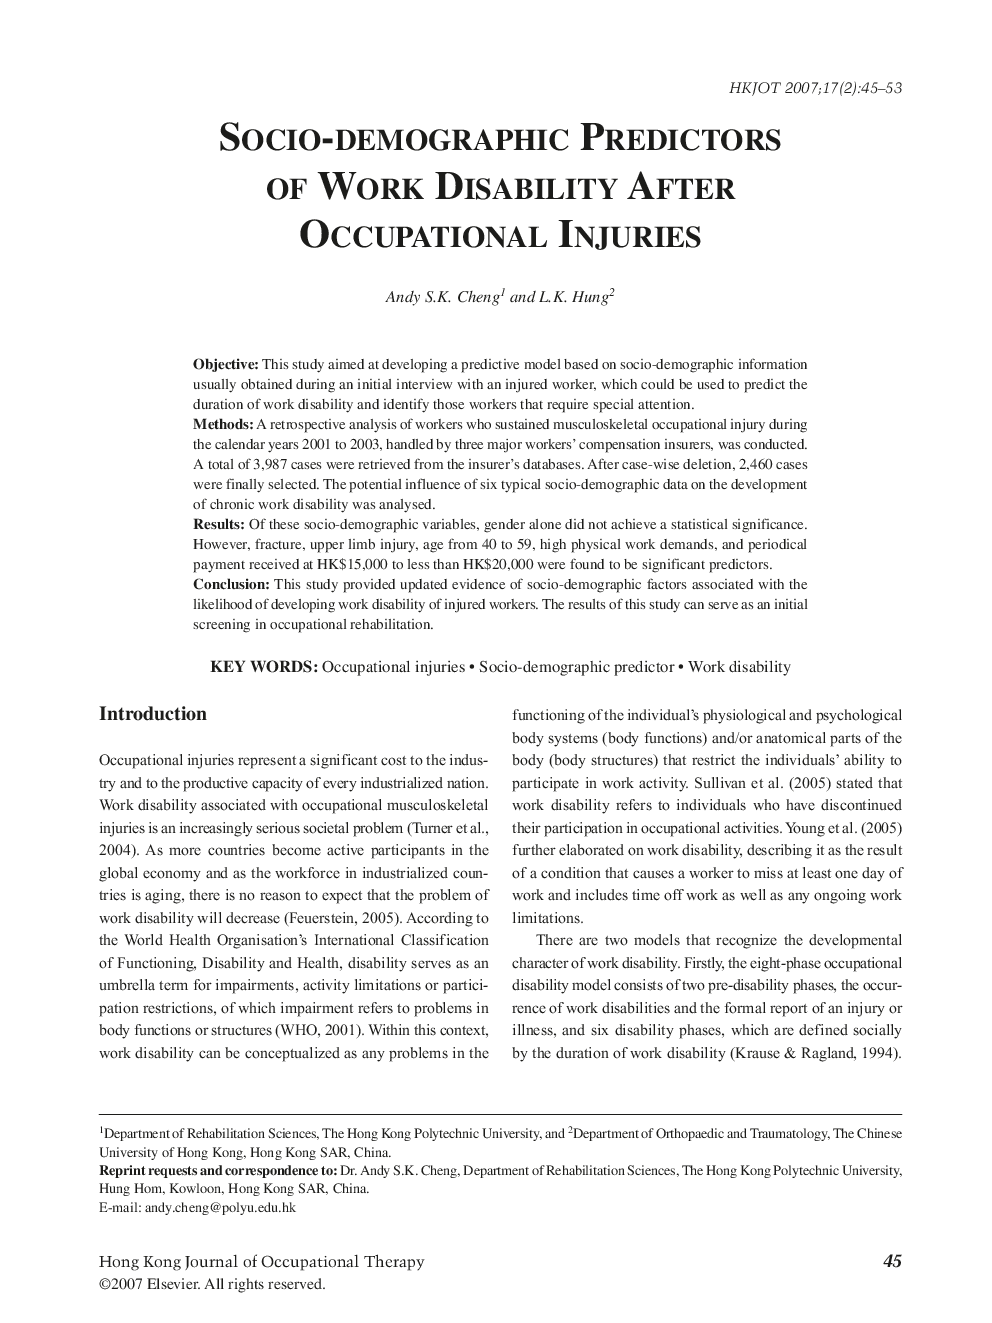 Socio-Demographic Predictors of Work Disability After Occupational Injuries